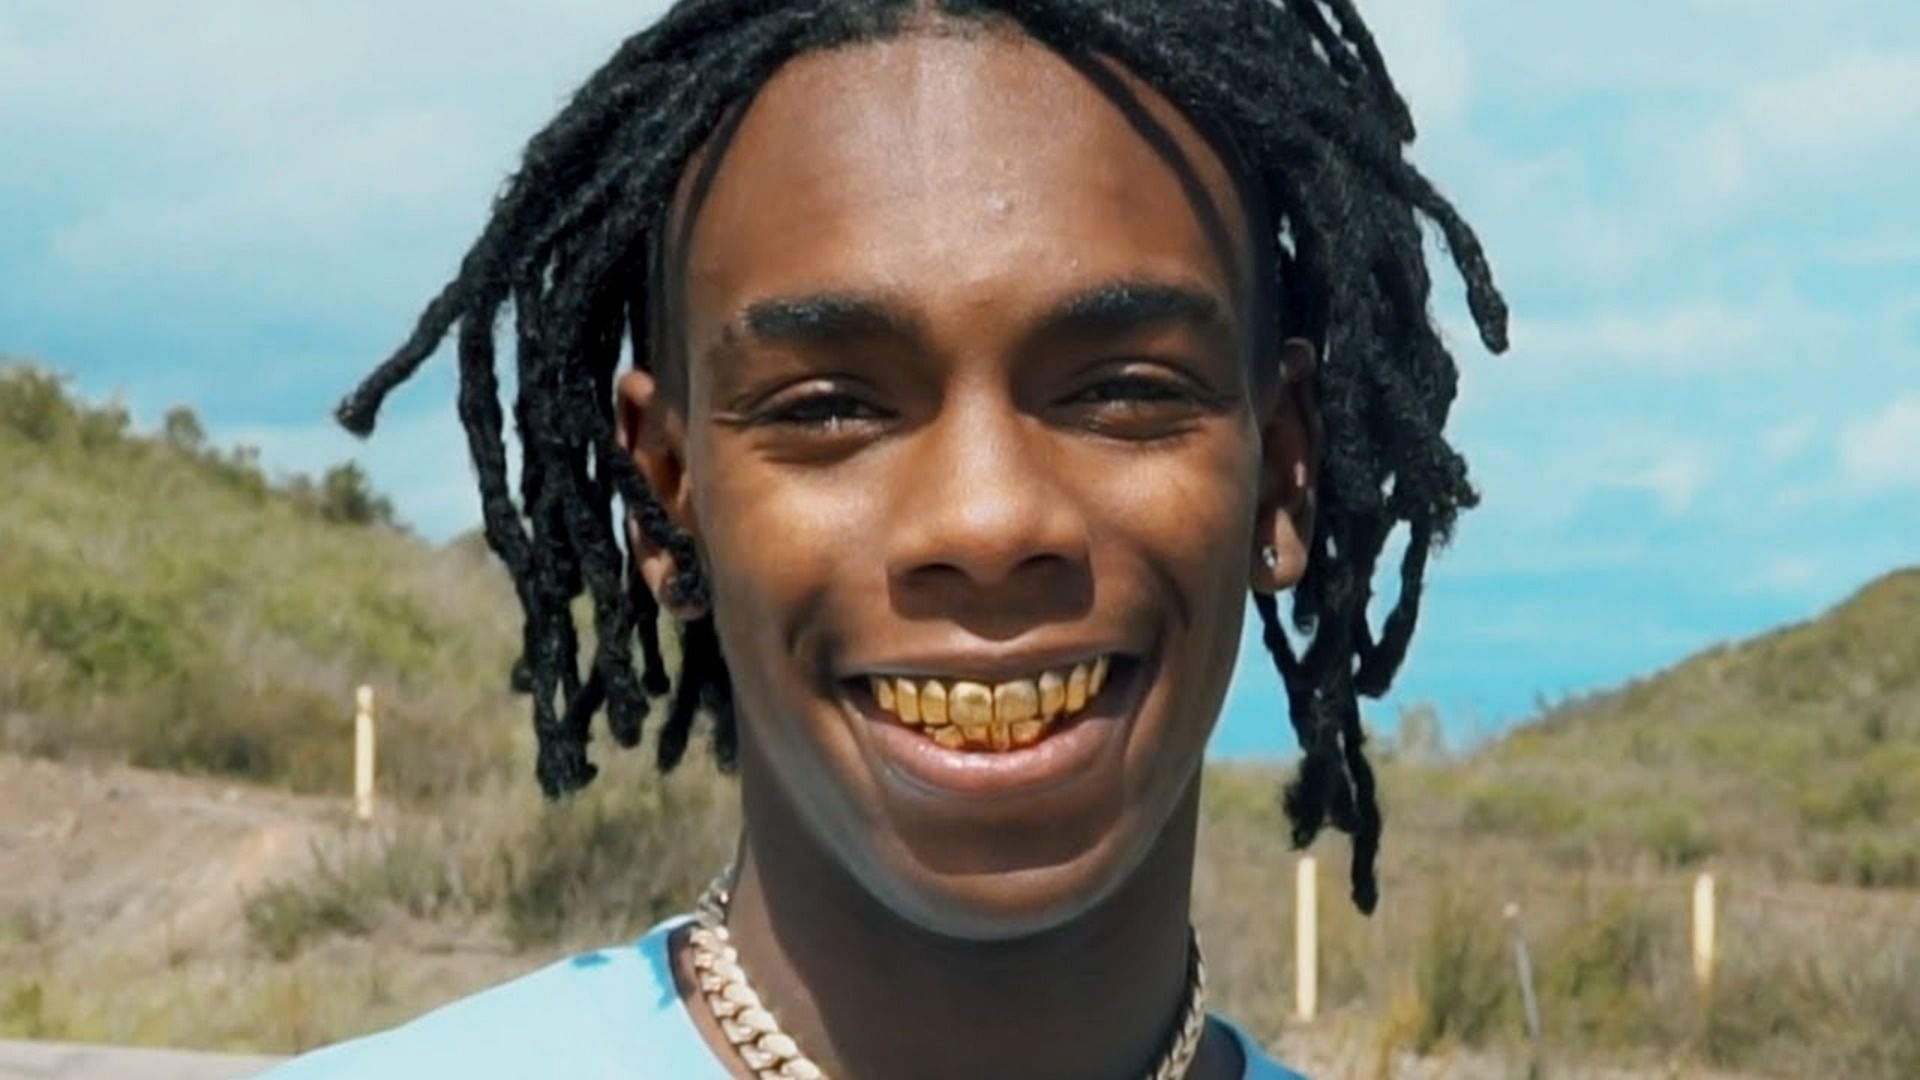 YNW Melly may have multiple personality disorder. (Image via YouTube/YNWMelly)